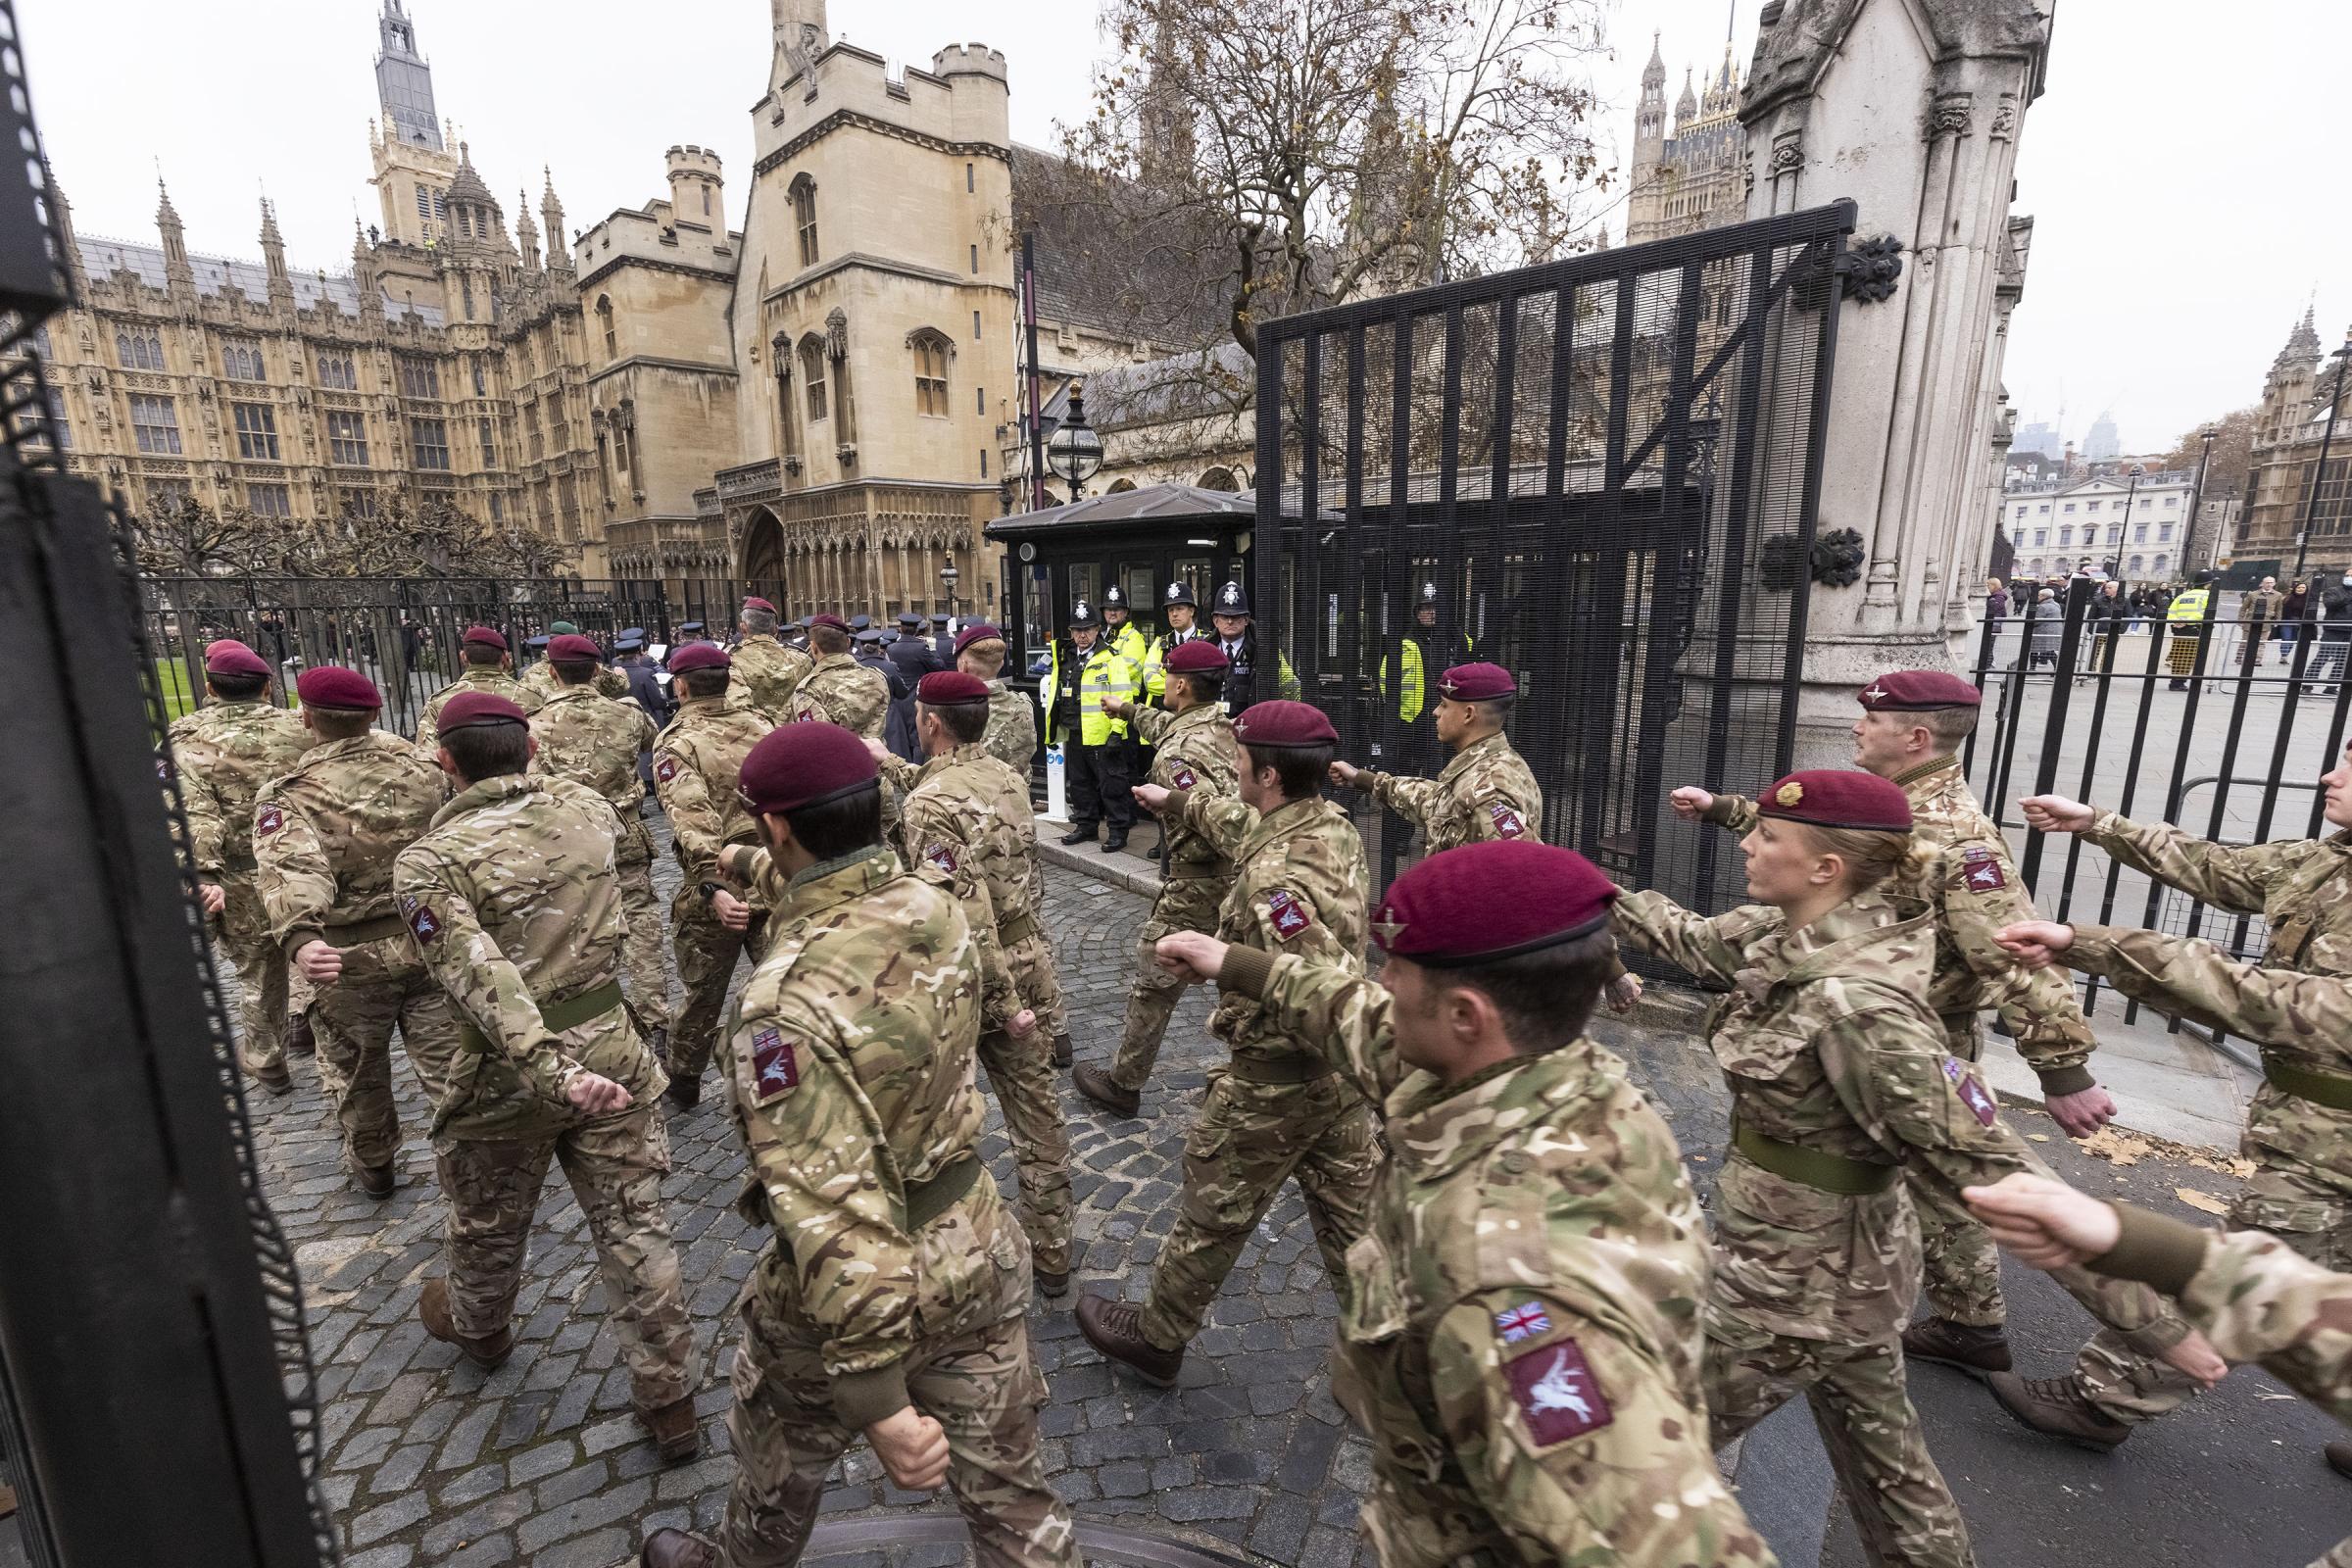 On parade - members of 16 Air Assault Brigade Combat Team marching into Parliament in London. Inset: The troops being greeted by Prime Minister Boris Johnson